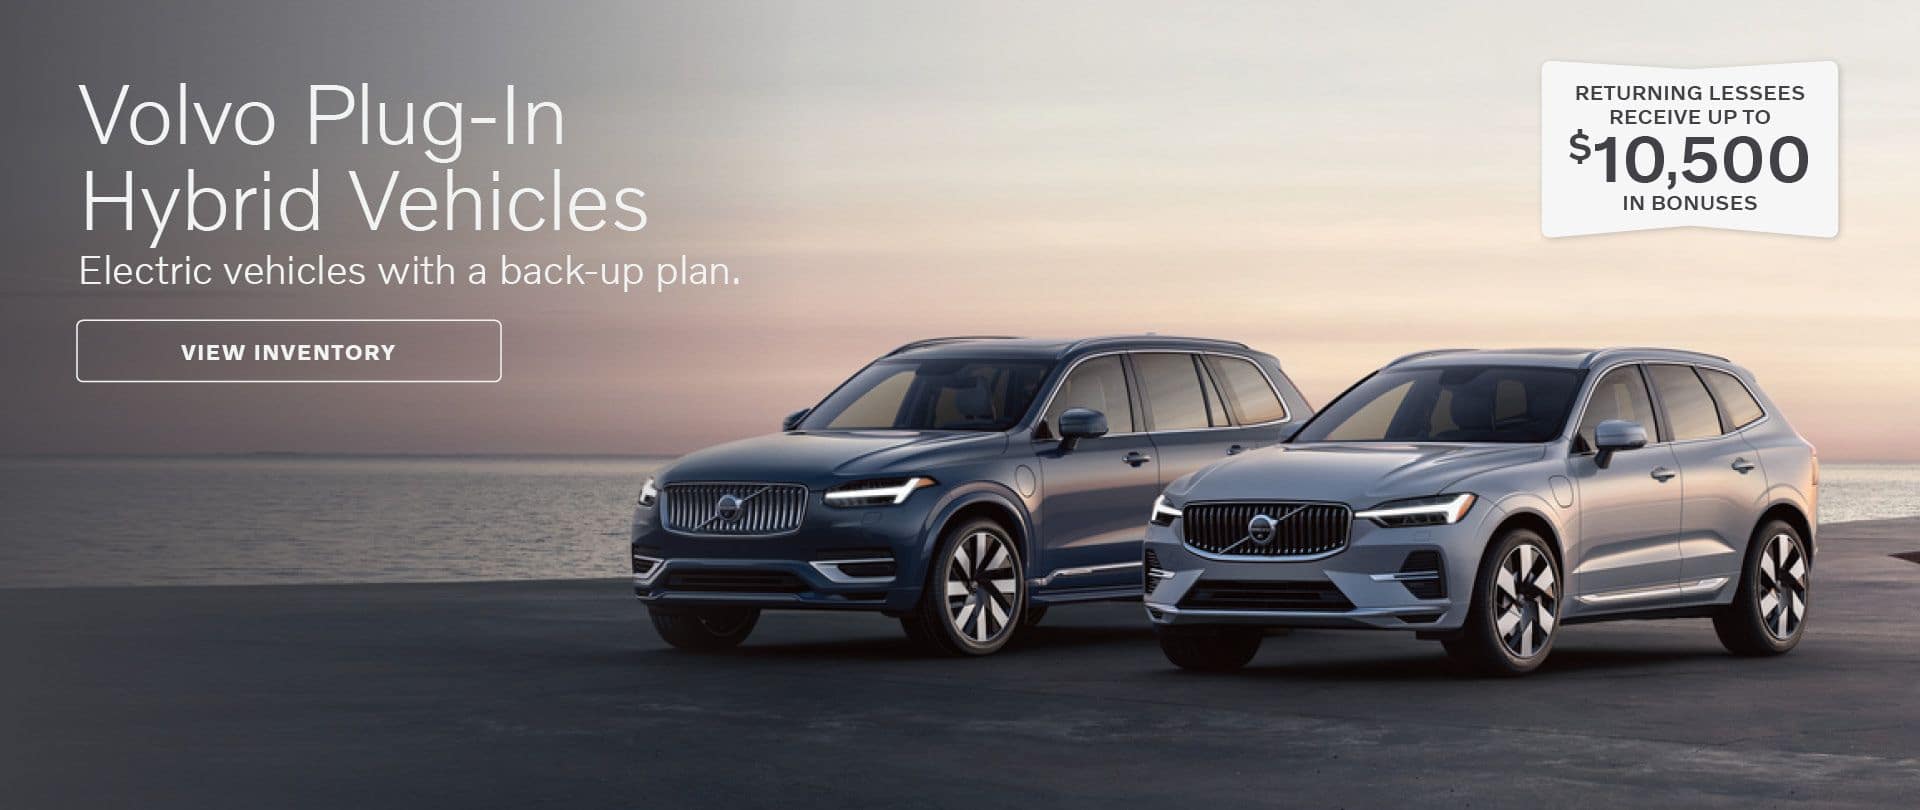 Northeast-apr24_Volvo Plug-In Hybrid Vehicles_Returning lessees receive up to 10,500 in Bonuses-1920&#215;824